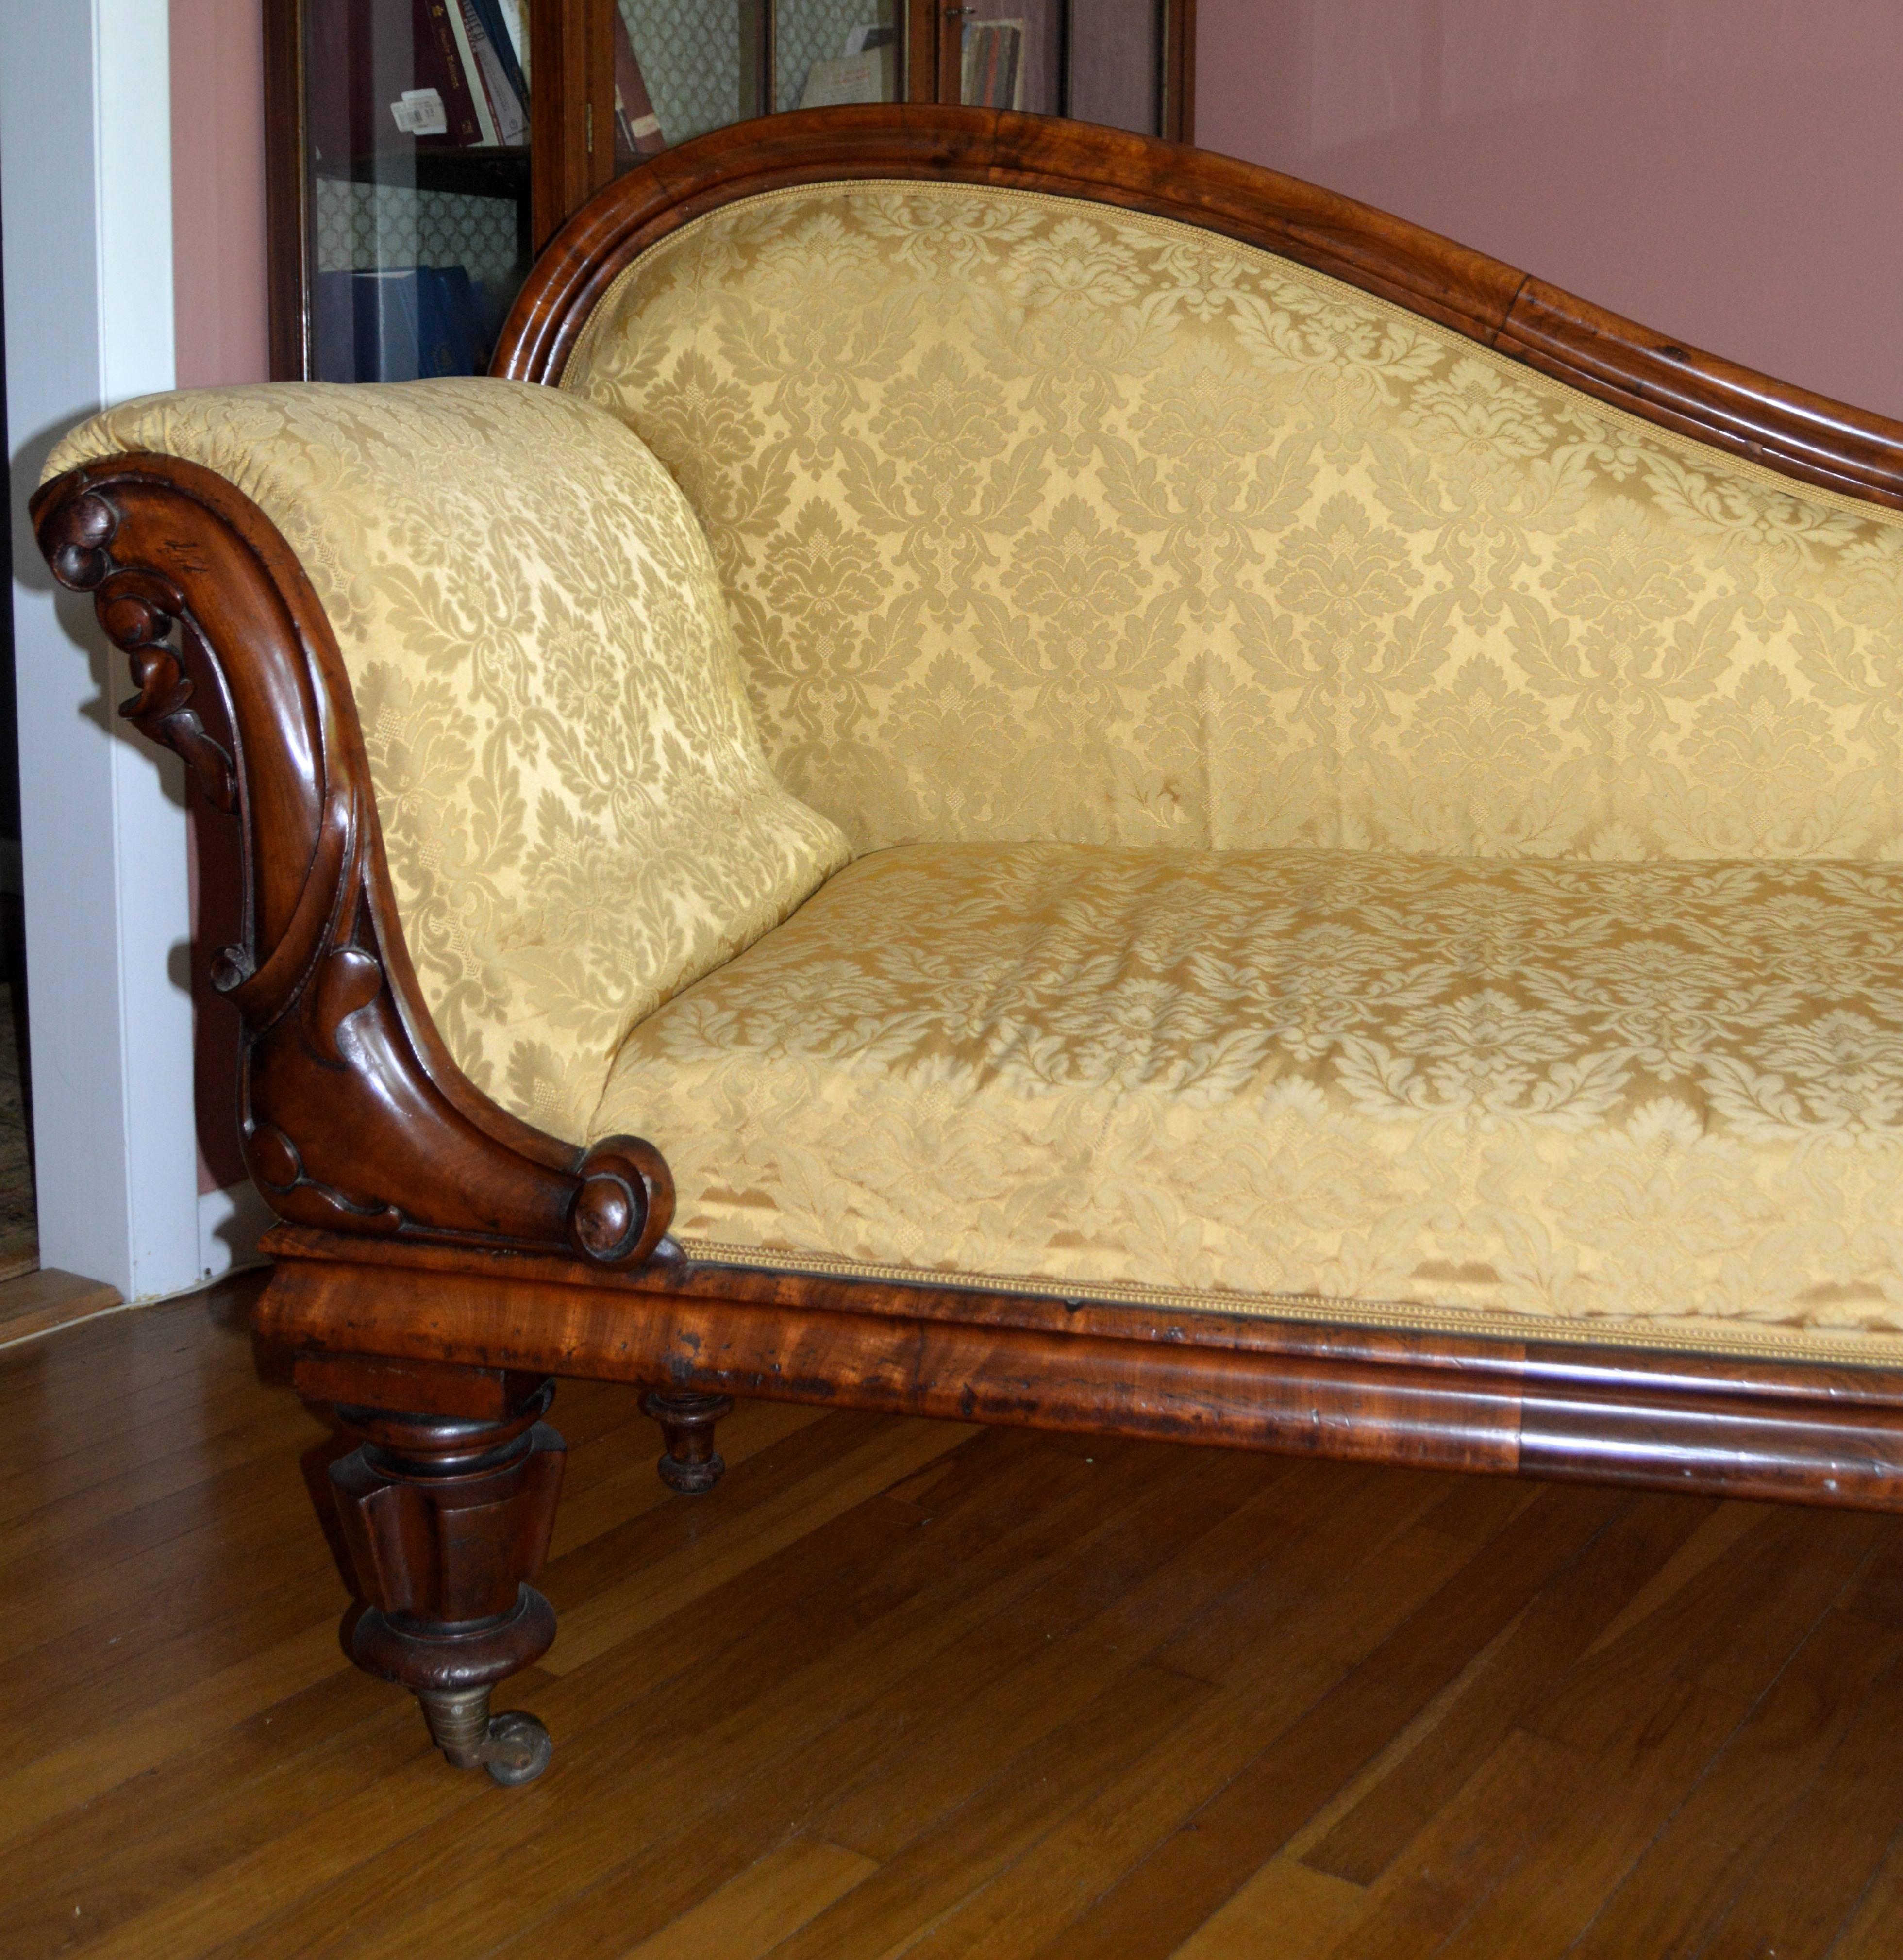 Rare and beautiful antique Danish Biedermeier chaise longue / recamier/ chaise lounge, probably of mahogany and with burled wood veneer, circa 1840. 

Gorgeously carved arm and back with foliate design. Casters on two front legs.

Upholstery in fair